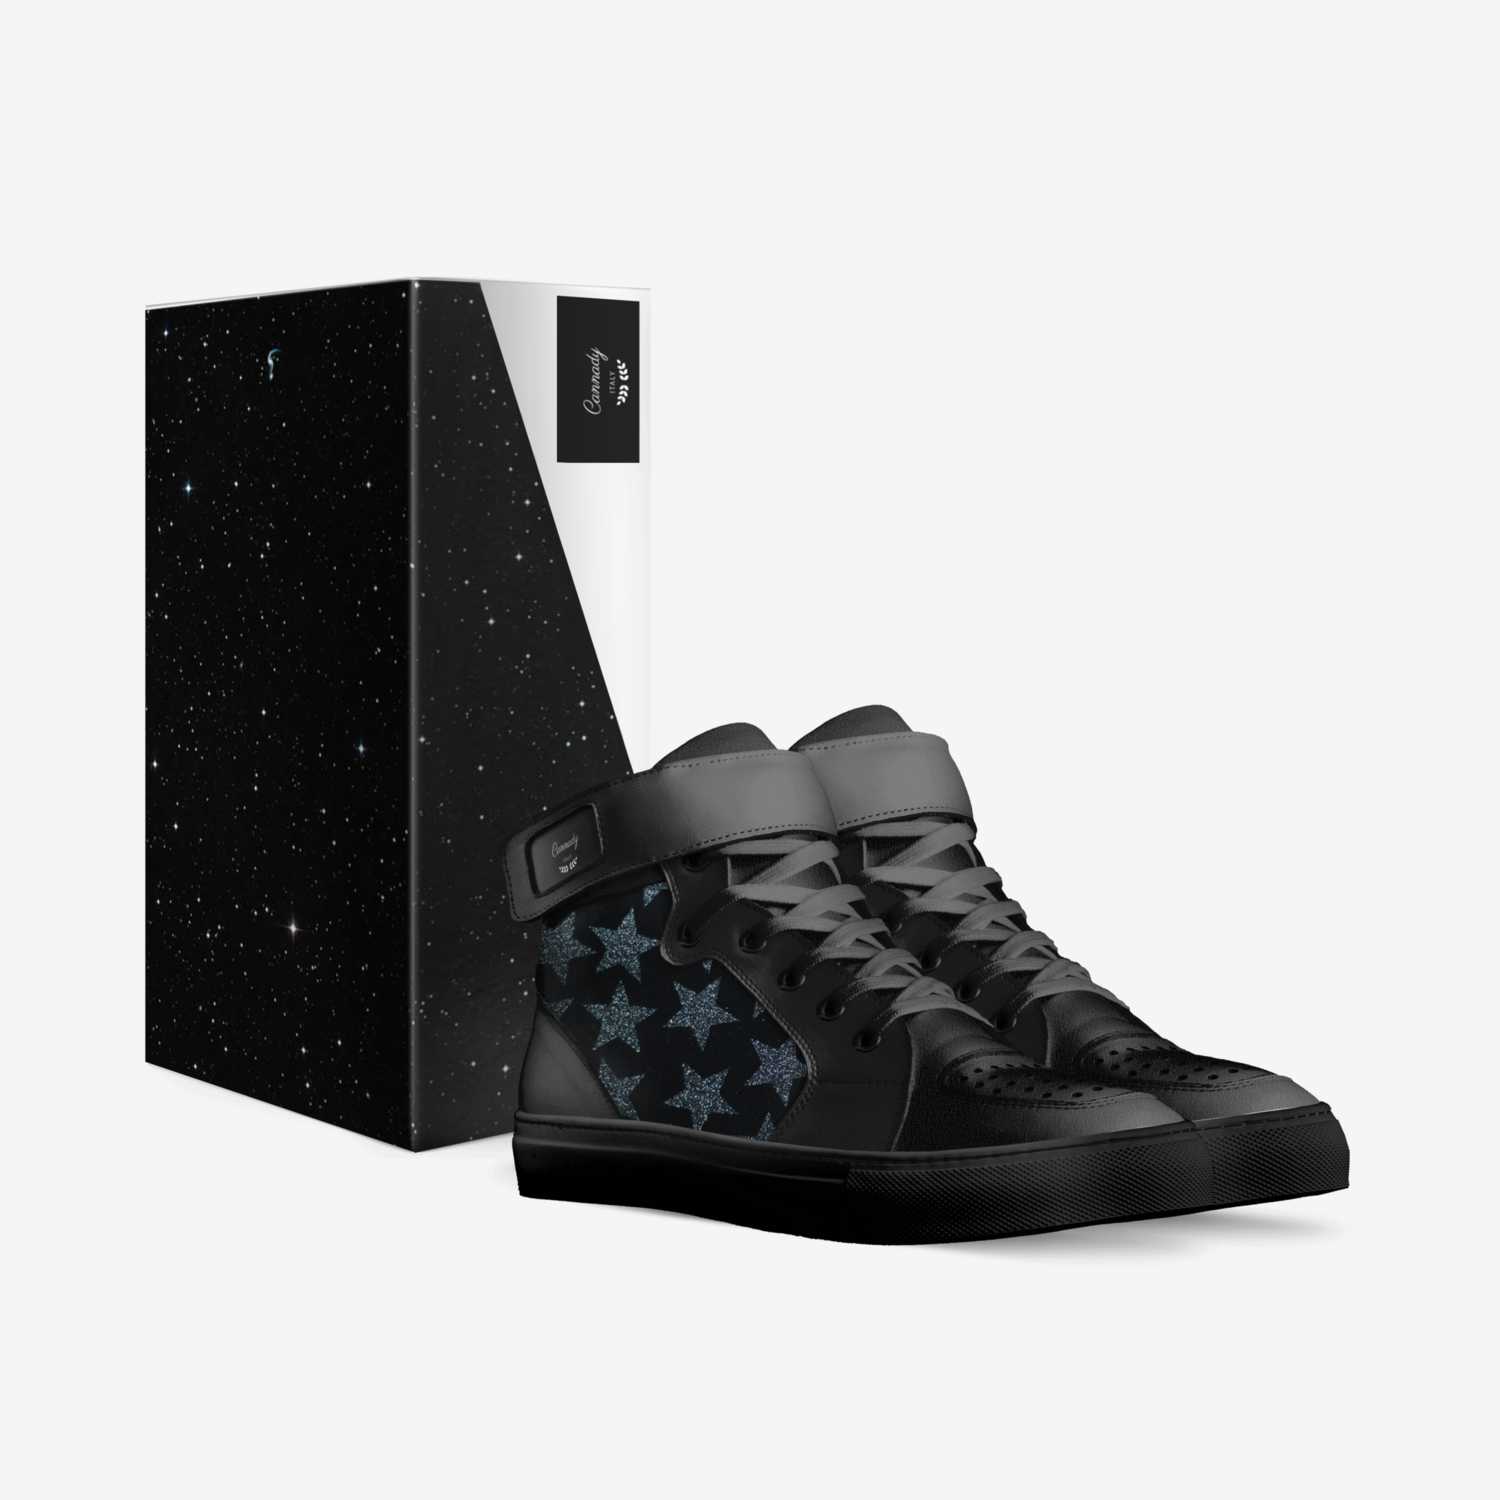 Dark Night custom made in Italy shoes by Avery Cannady | Box view